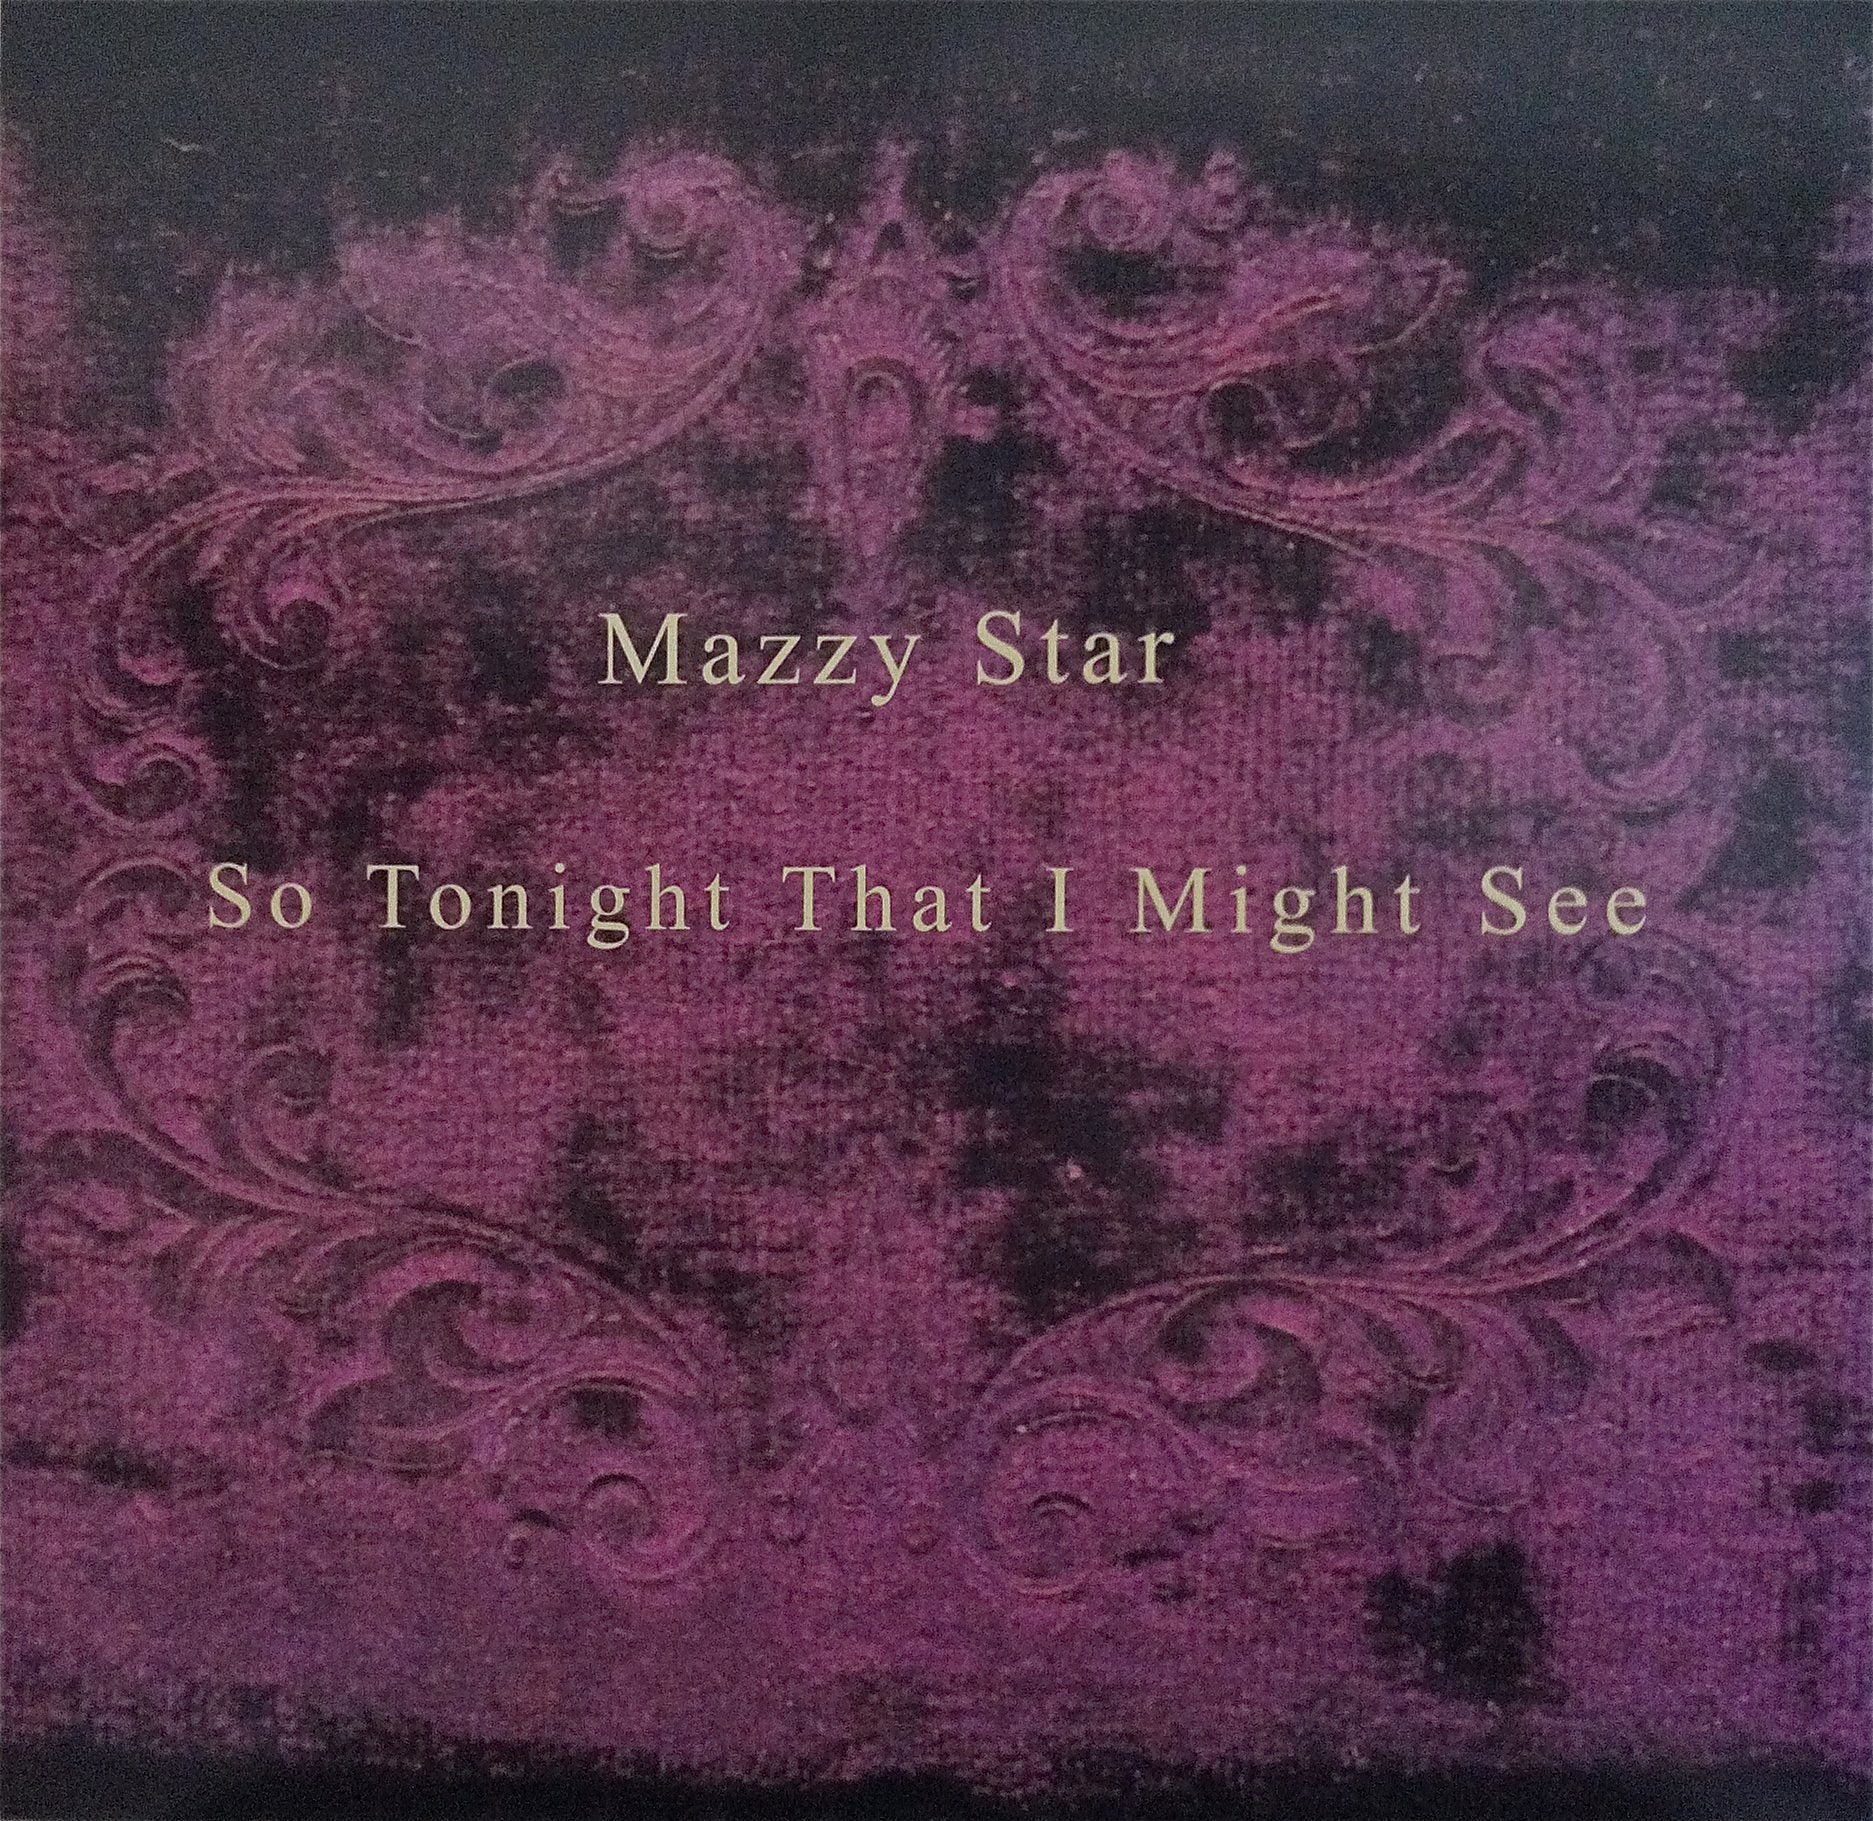 Mazzy Star "So Tonight That I Might See"